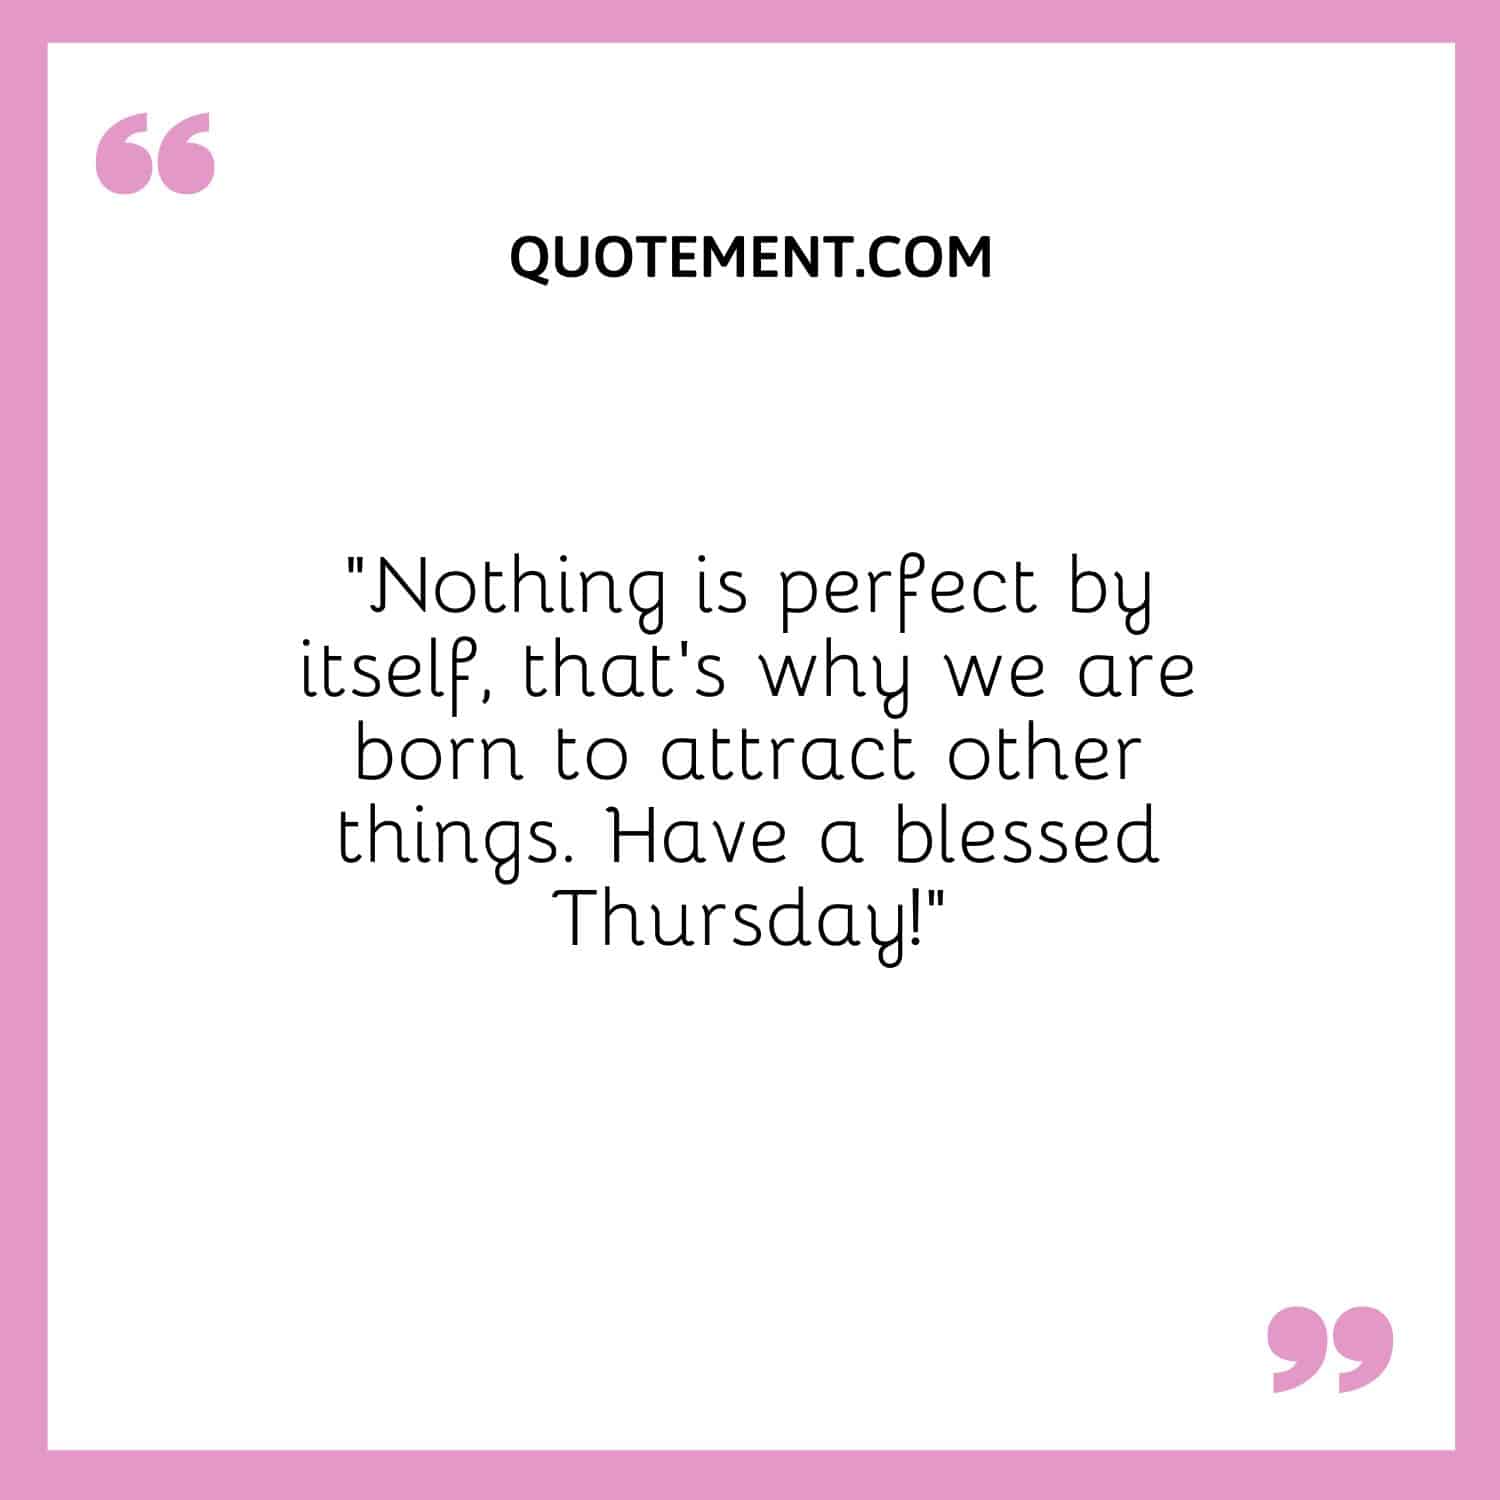 “Nothing is perfect by itself, that’s why we are born to attract other things. Have a blessed Thursday!”